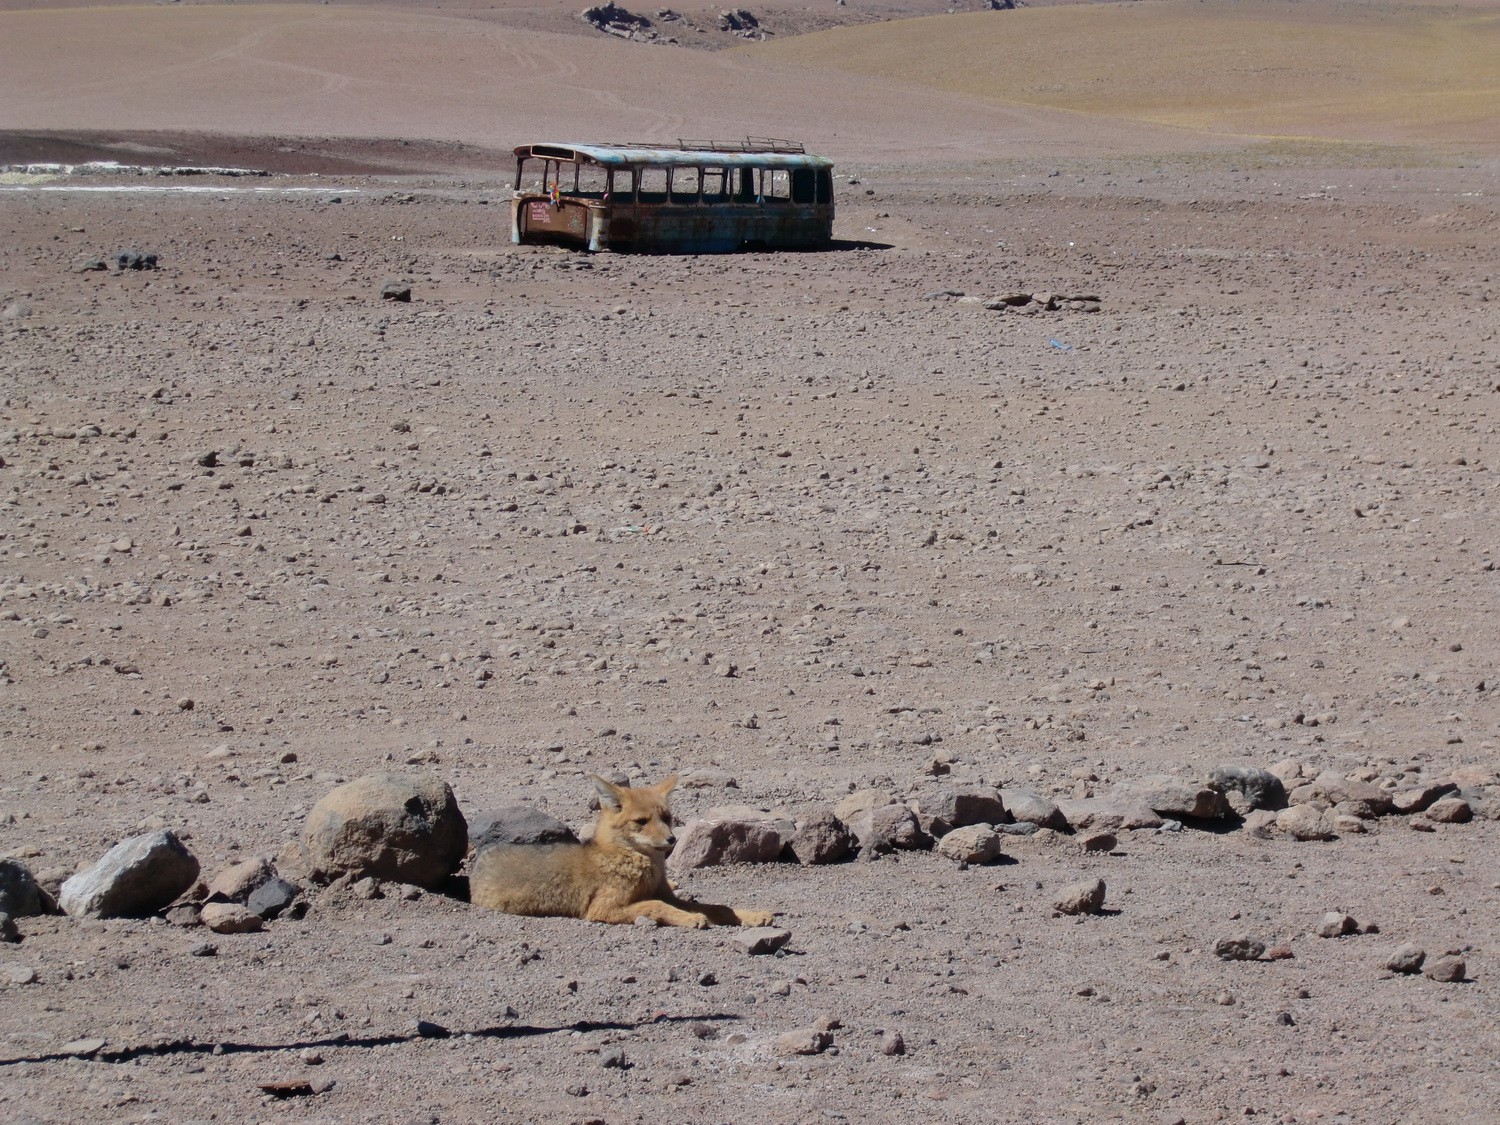 Fox and bus on the border Chile / Boliva